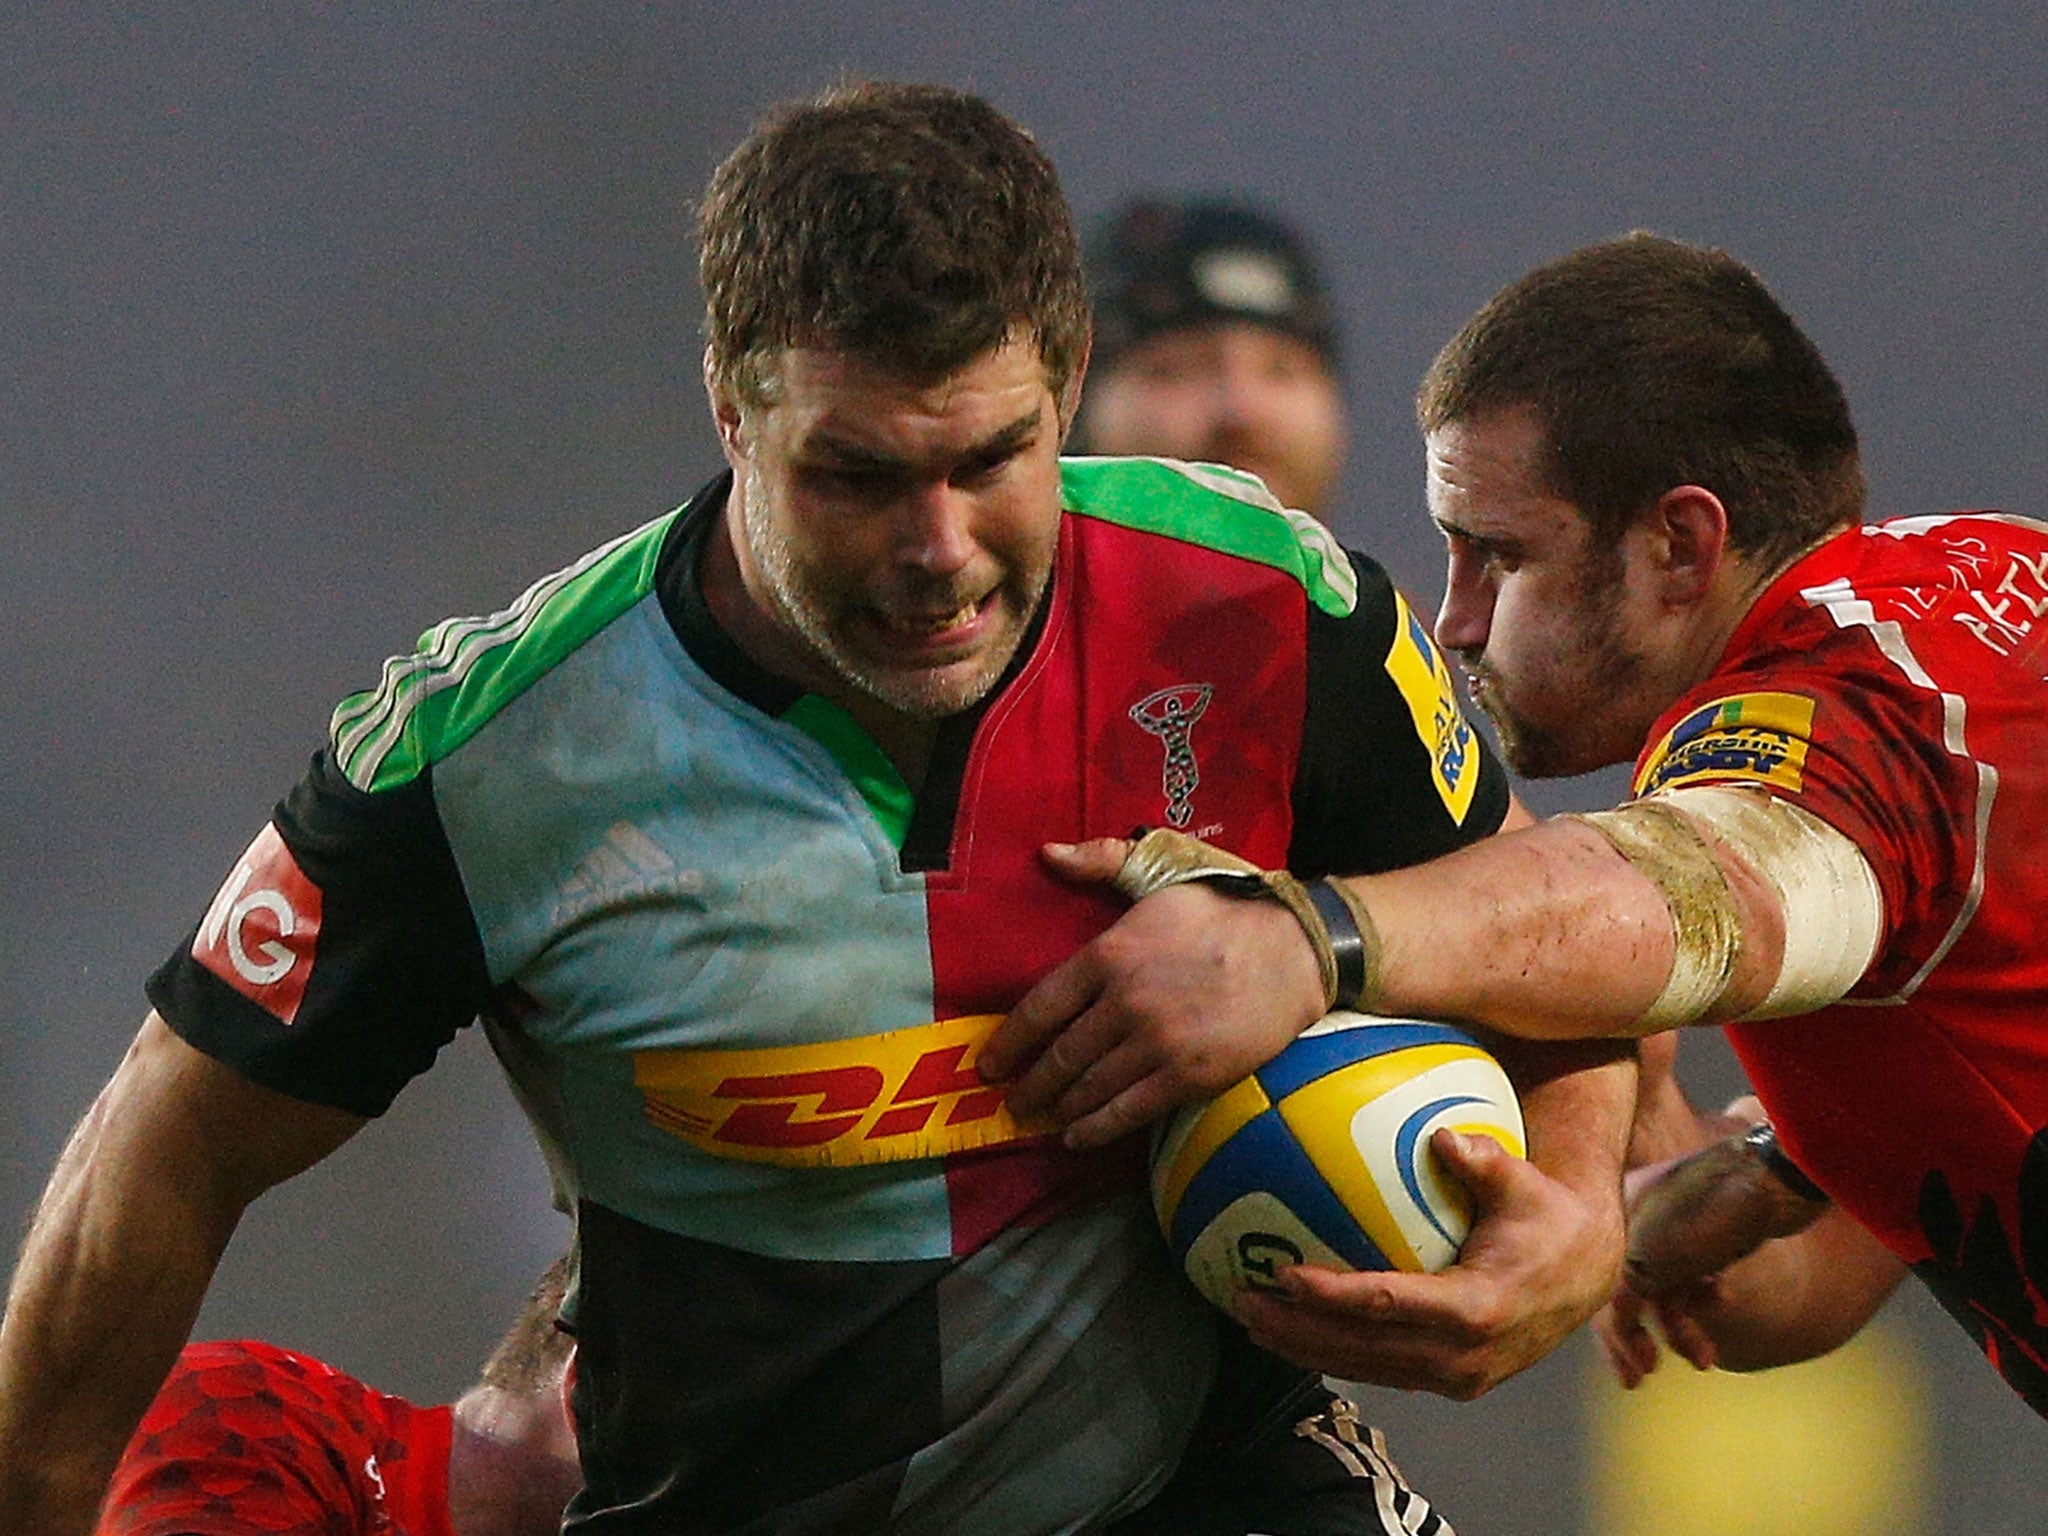 Harlequins No 8 Nick Easter is still hoping for an England recall in time to play in the World Cup at 37